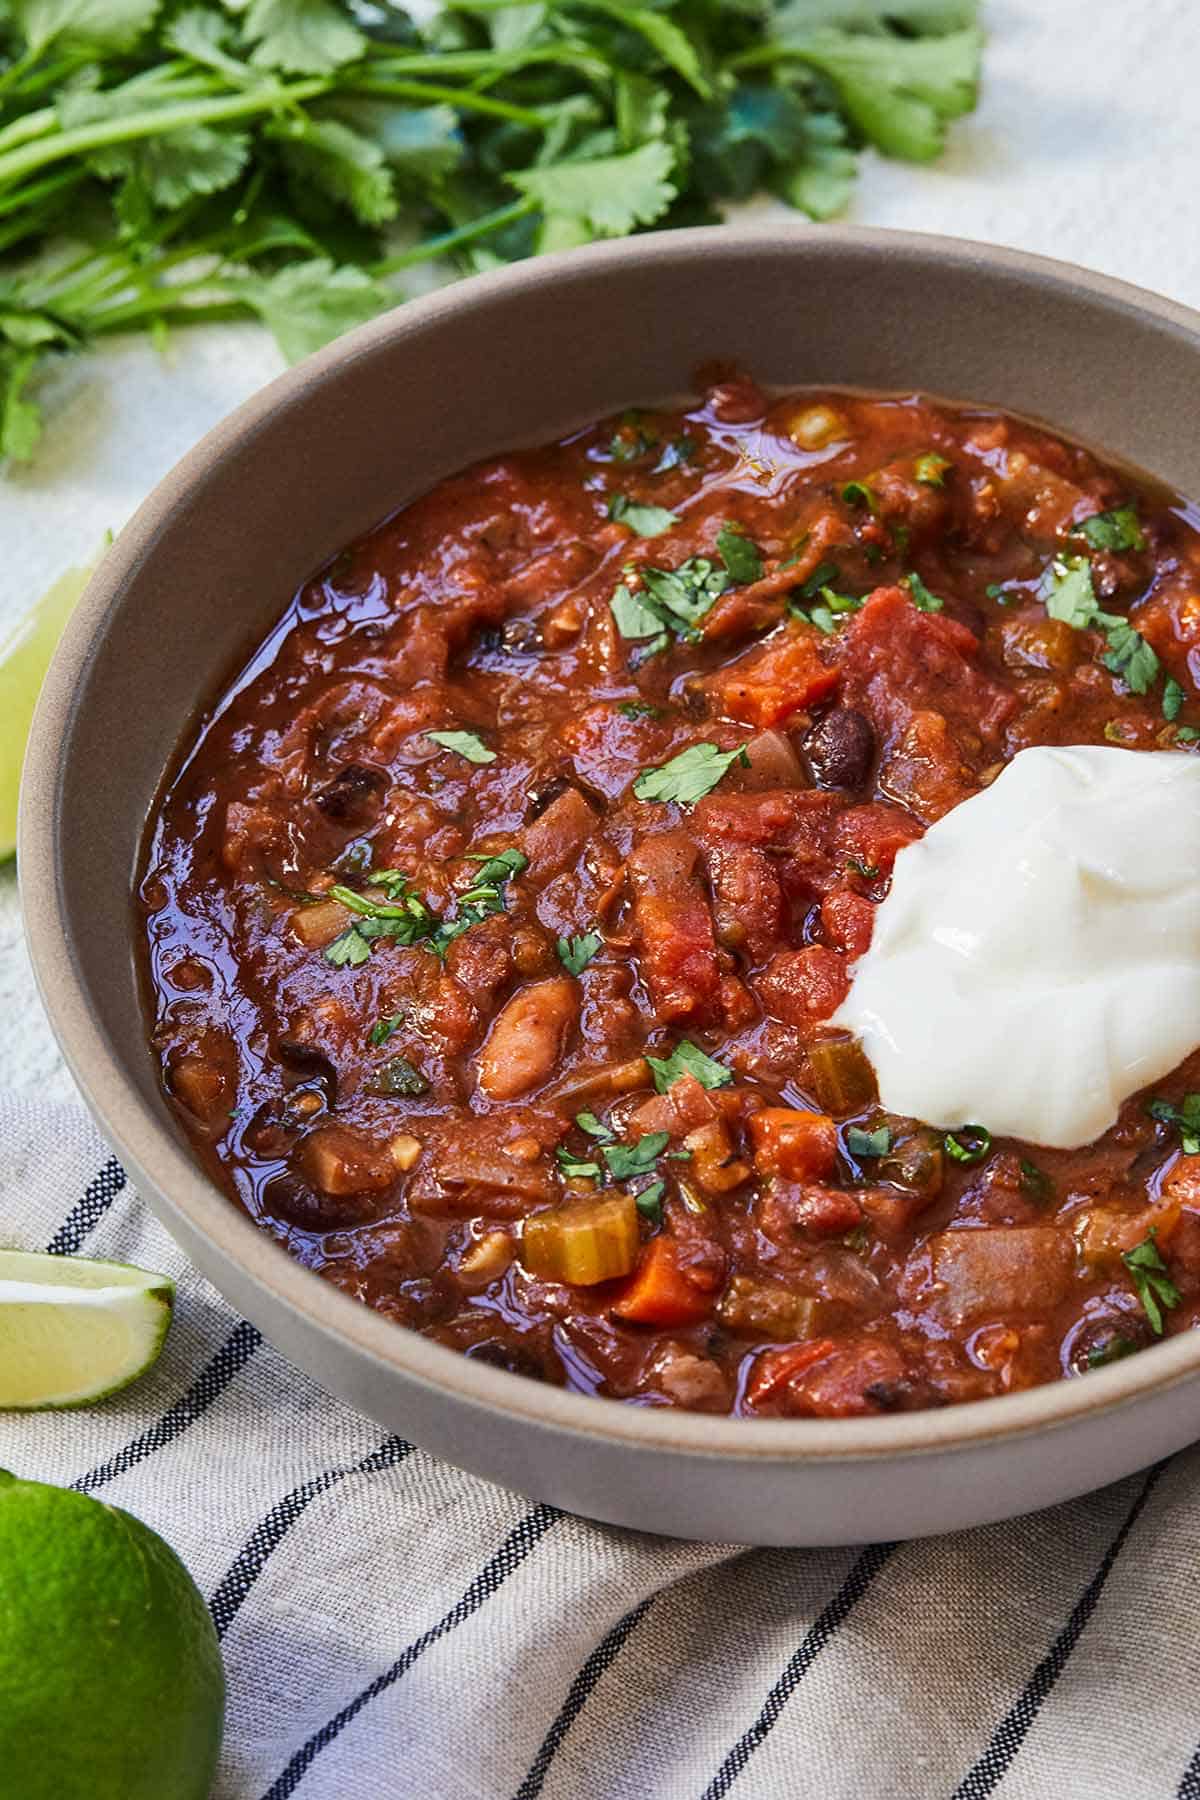 Featured Image of Vegetarian Chili.